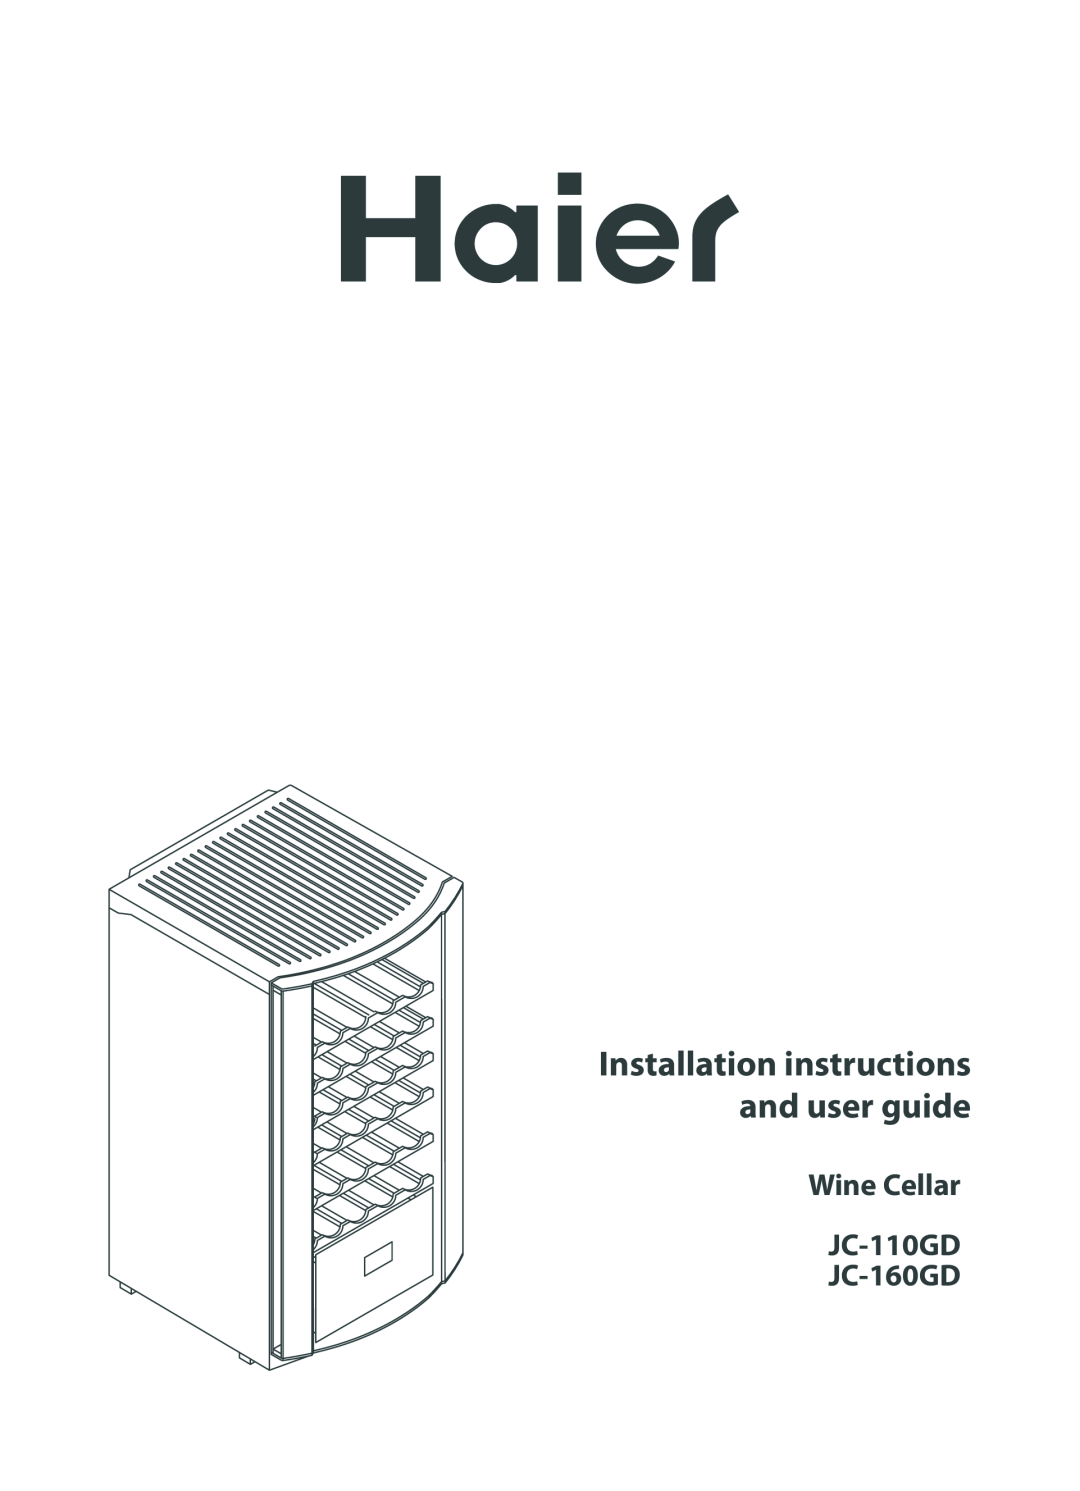 Haier JC-110GD user manual Wine Cellar, JC-160GD, Features and size may vary per model, Model # 